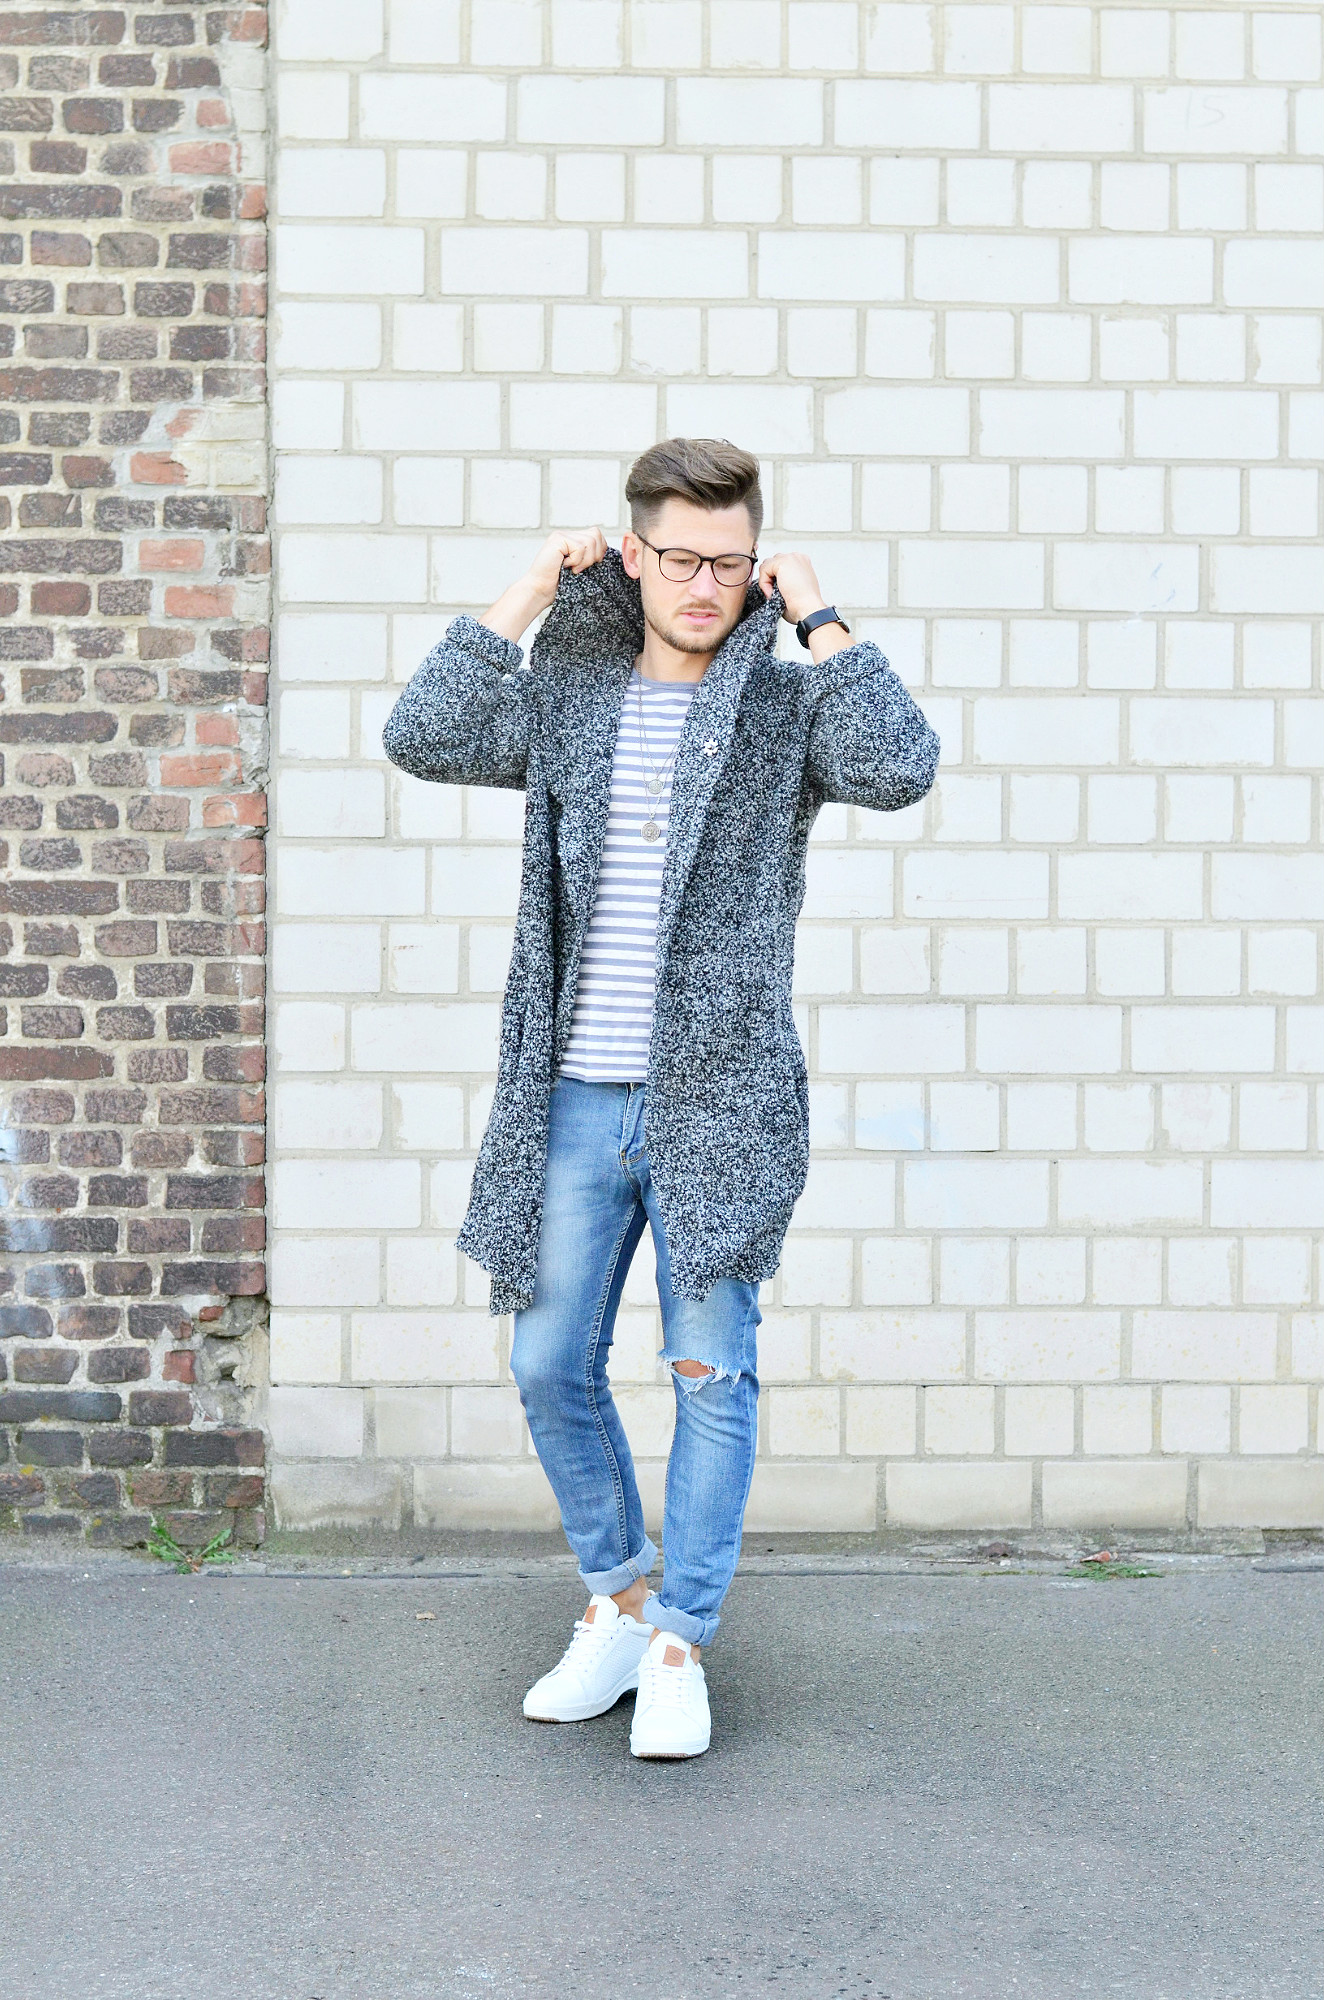 tommeezjerry-männer-style-blog-berlin-outfit-cardigan